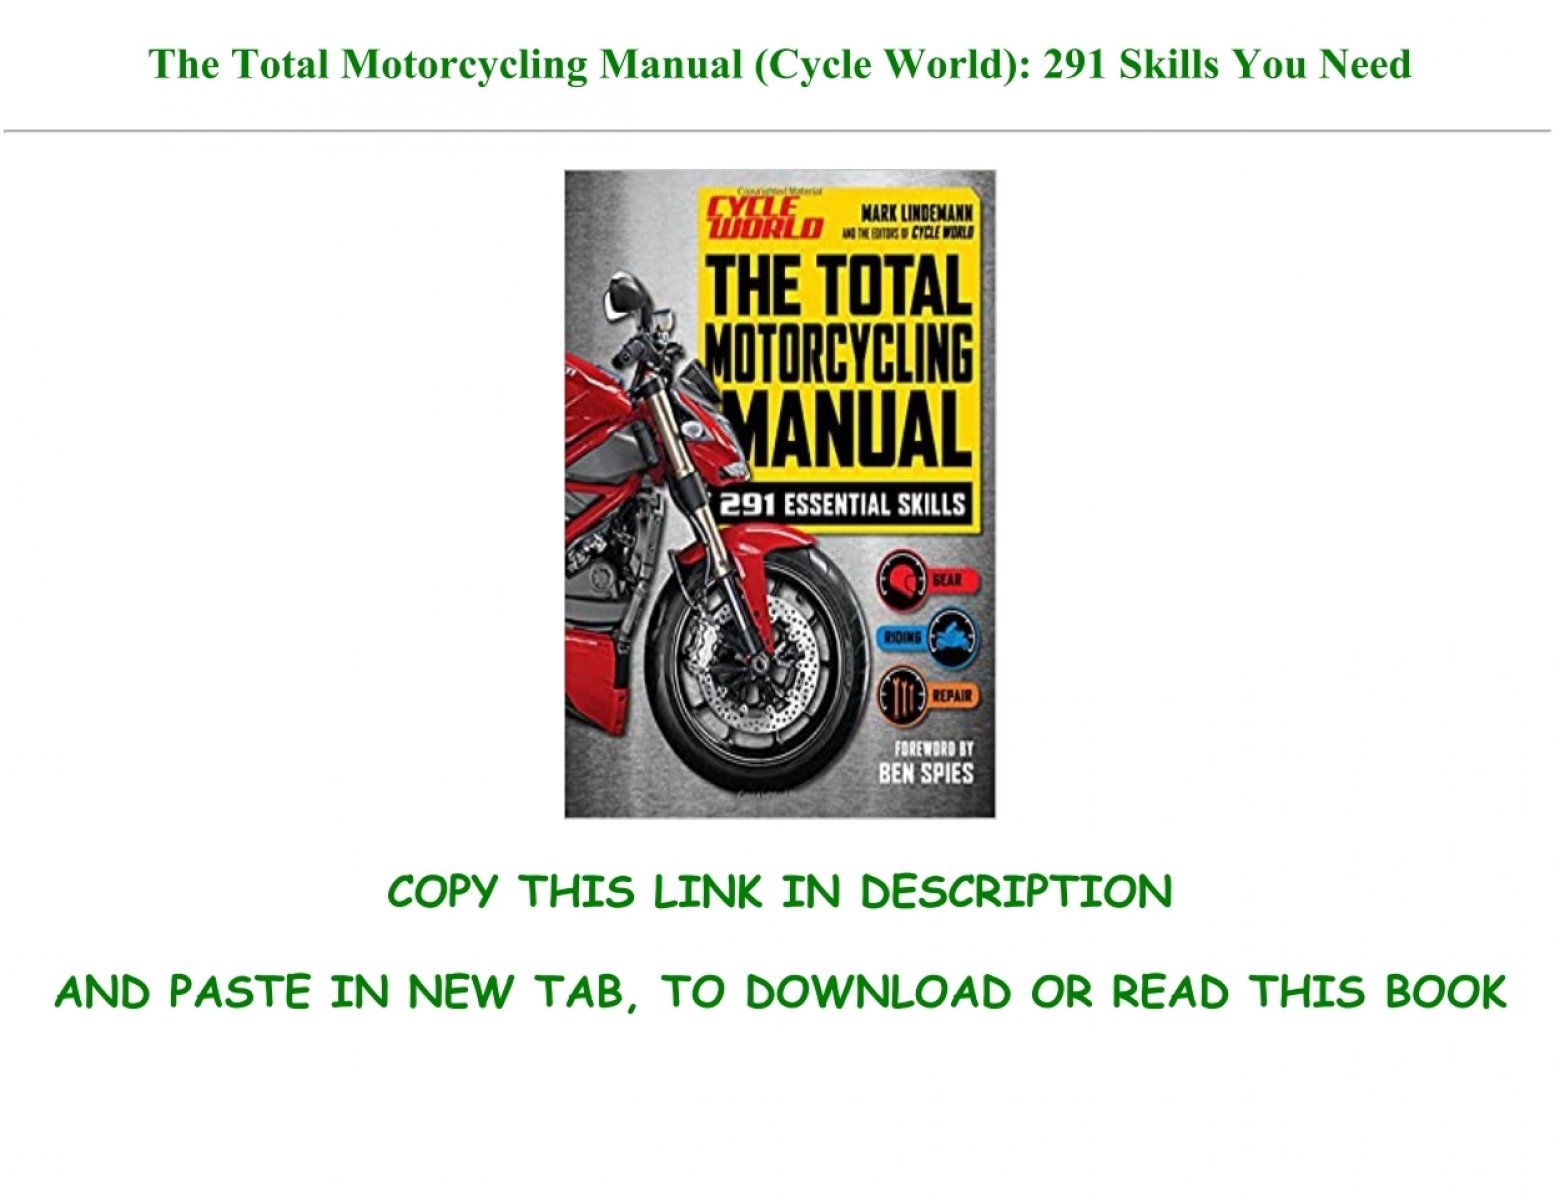 Free Download The Total Motorcycling Manual Cycle World 291 Skills You Need Full Pdf Online